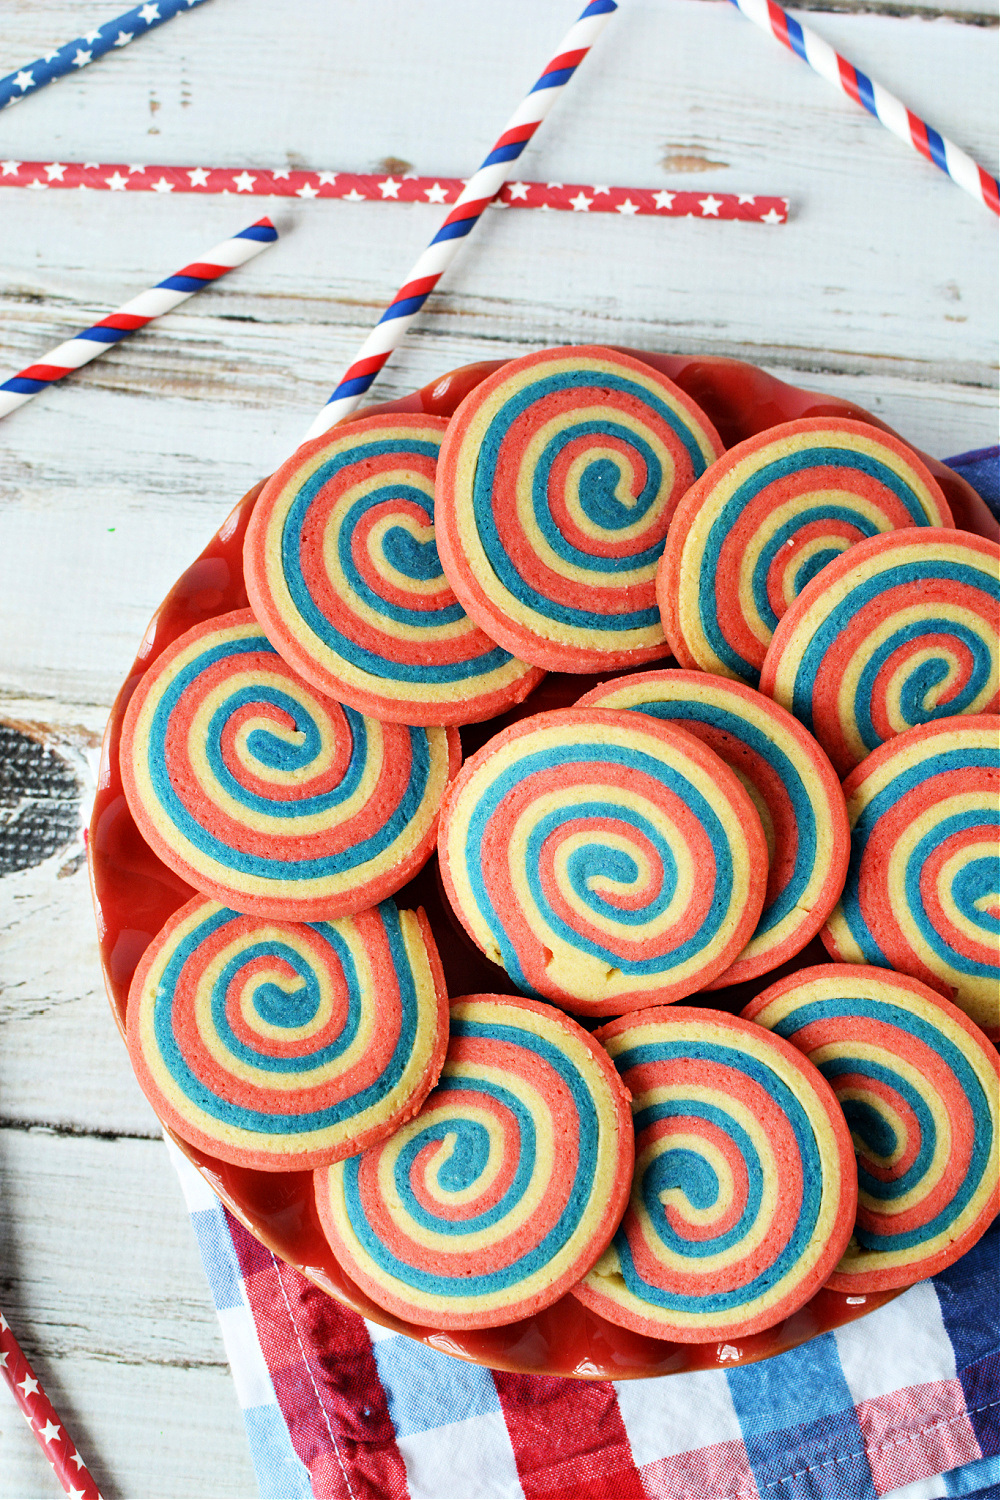 Red White and Blue Cookies for 4th of July